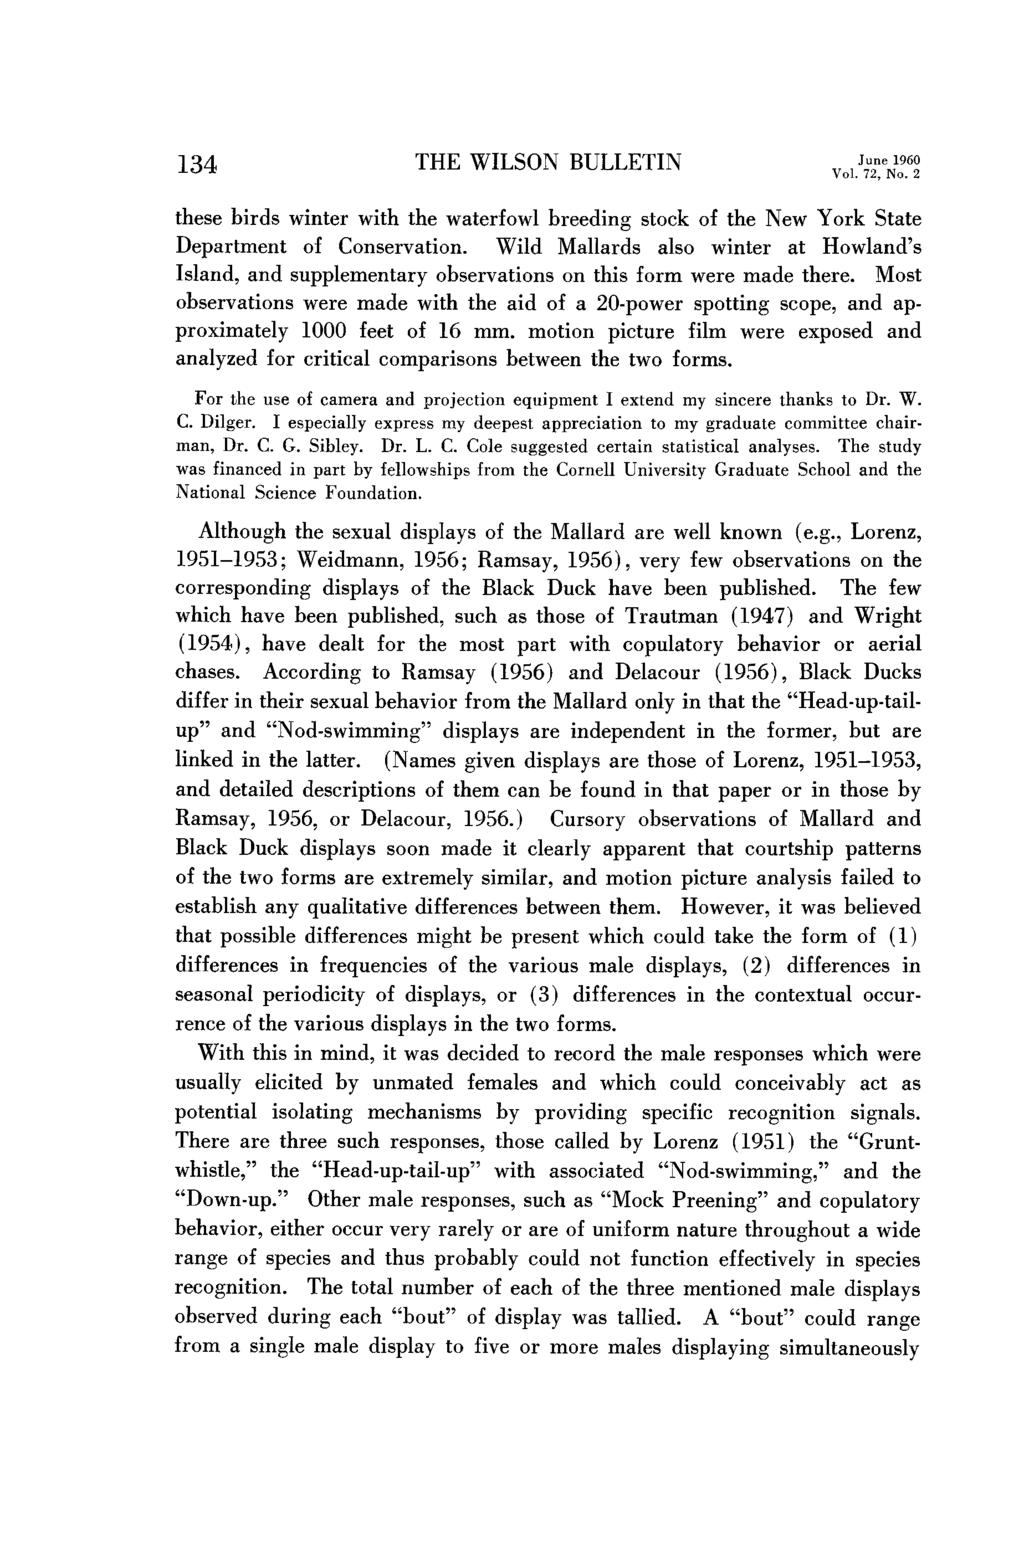 134 THE WILSON BULLETIN June 1960 Vol. 72, No. 2 these birds winter with the waterfowl breeding stock of the New York State Department of Conservation.